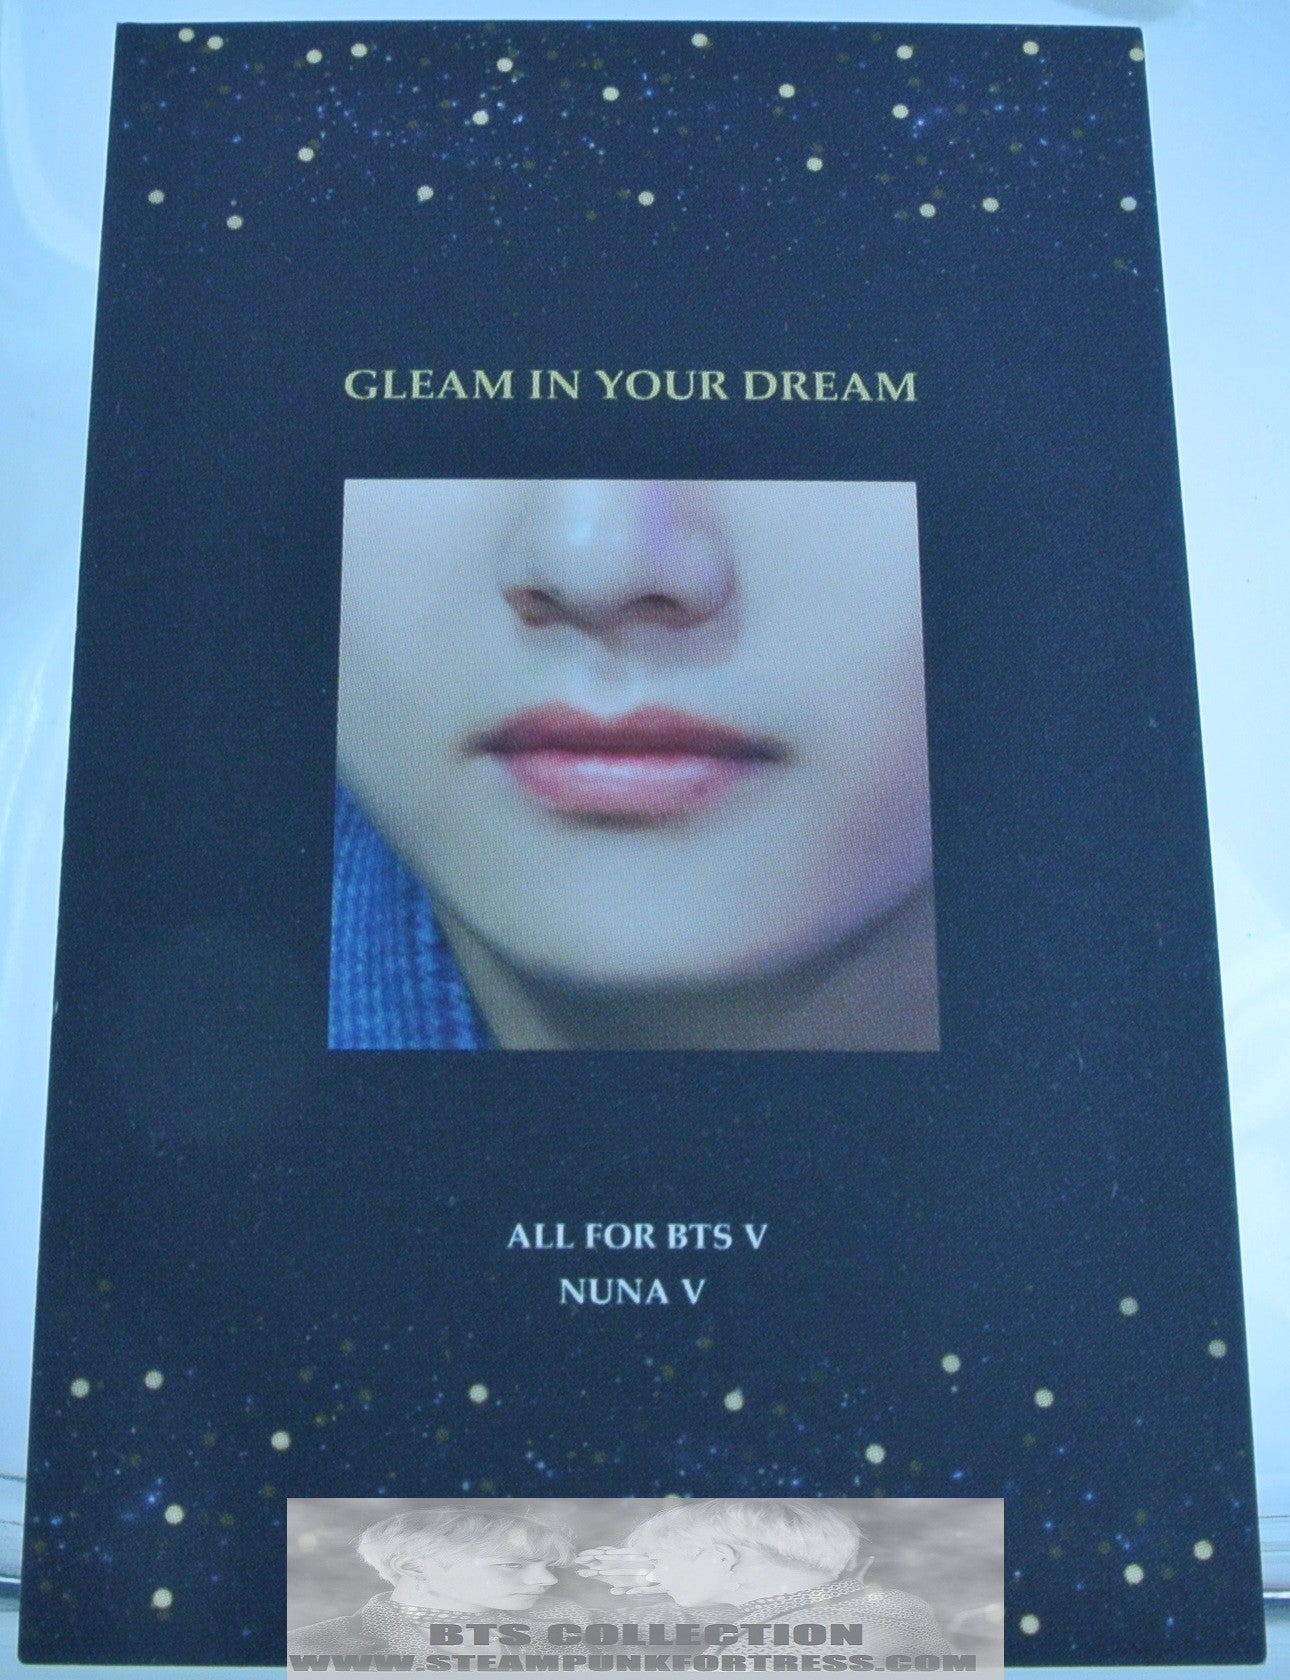 BTS V KIM TAEHYUNG FANSITE PHOTOCARD BLOND HAIR BLUE SUIT RED DRAPES GLEAM IN YOUR DREAM NUNA V PHOTO CARD